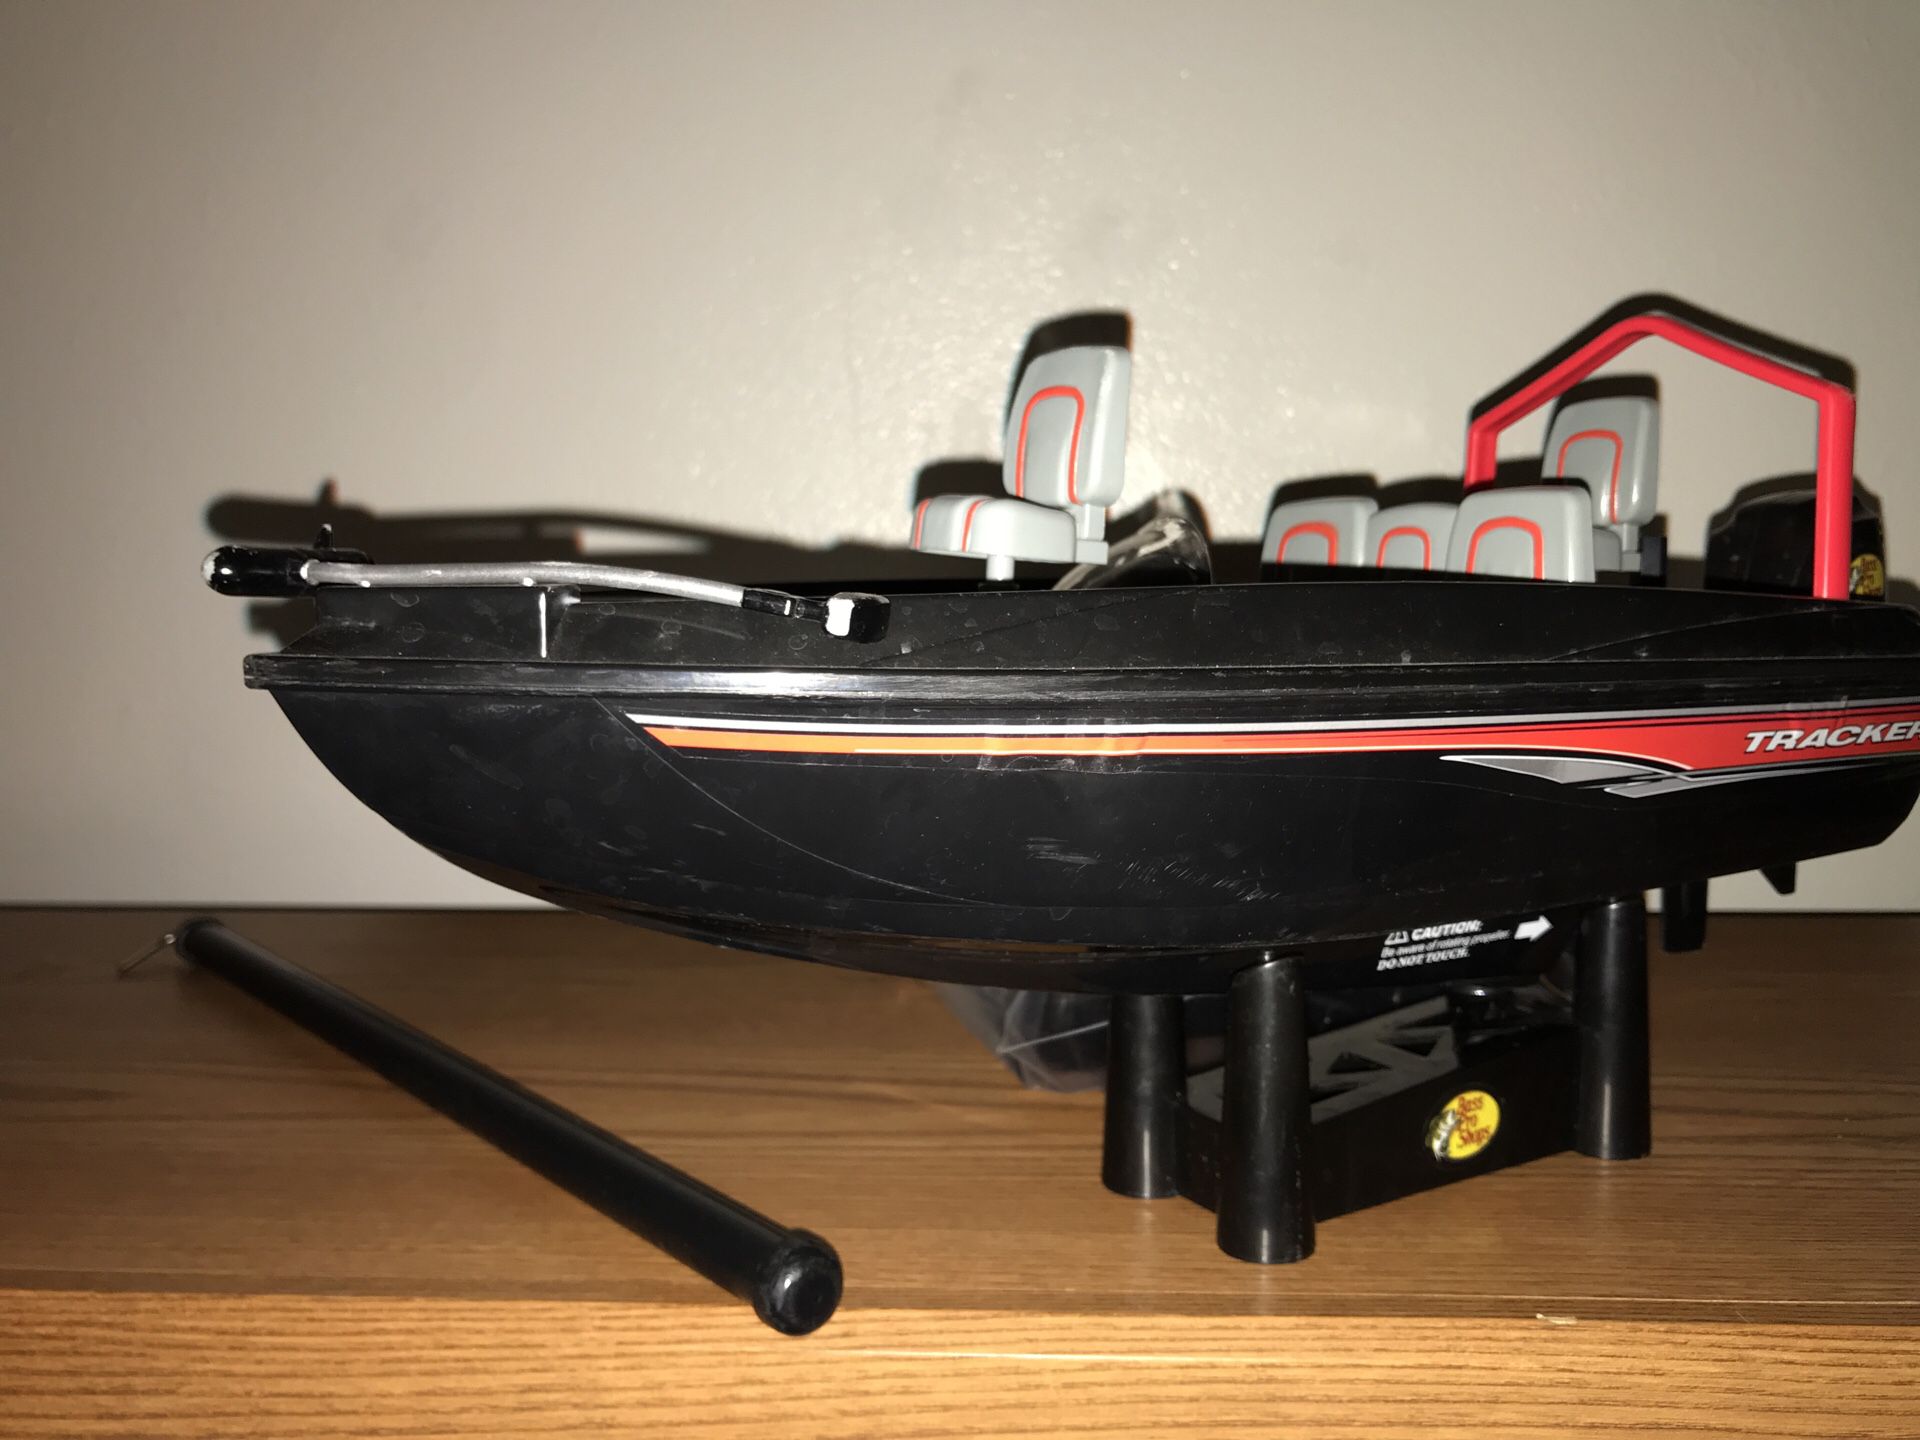 Bass Pro remote control fishing boat for Sale in Fresno, CA - OfferUp